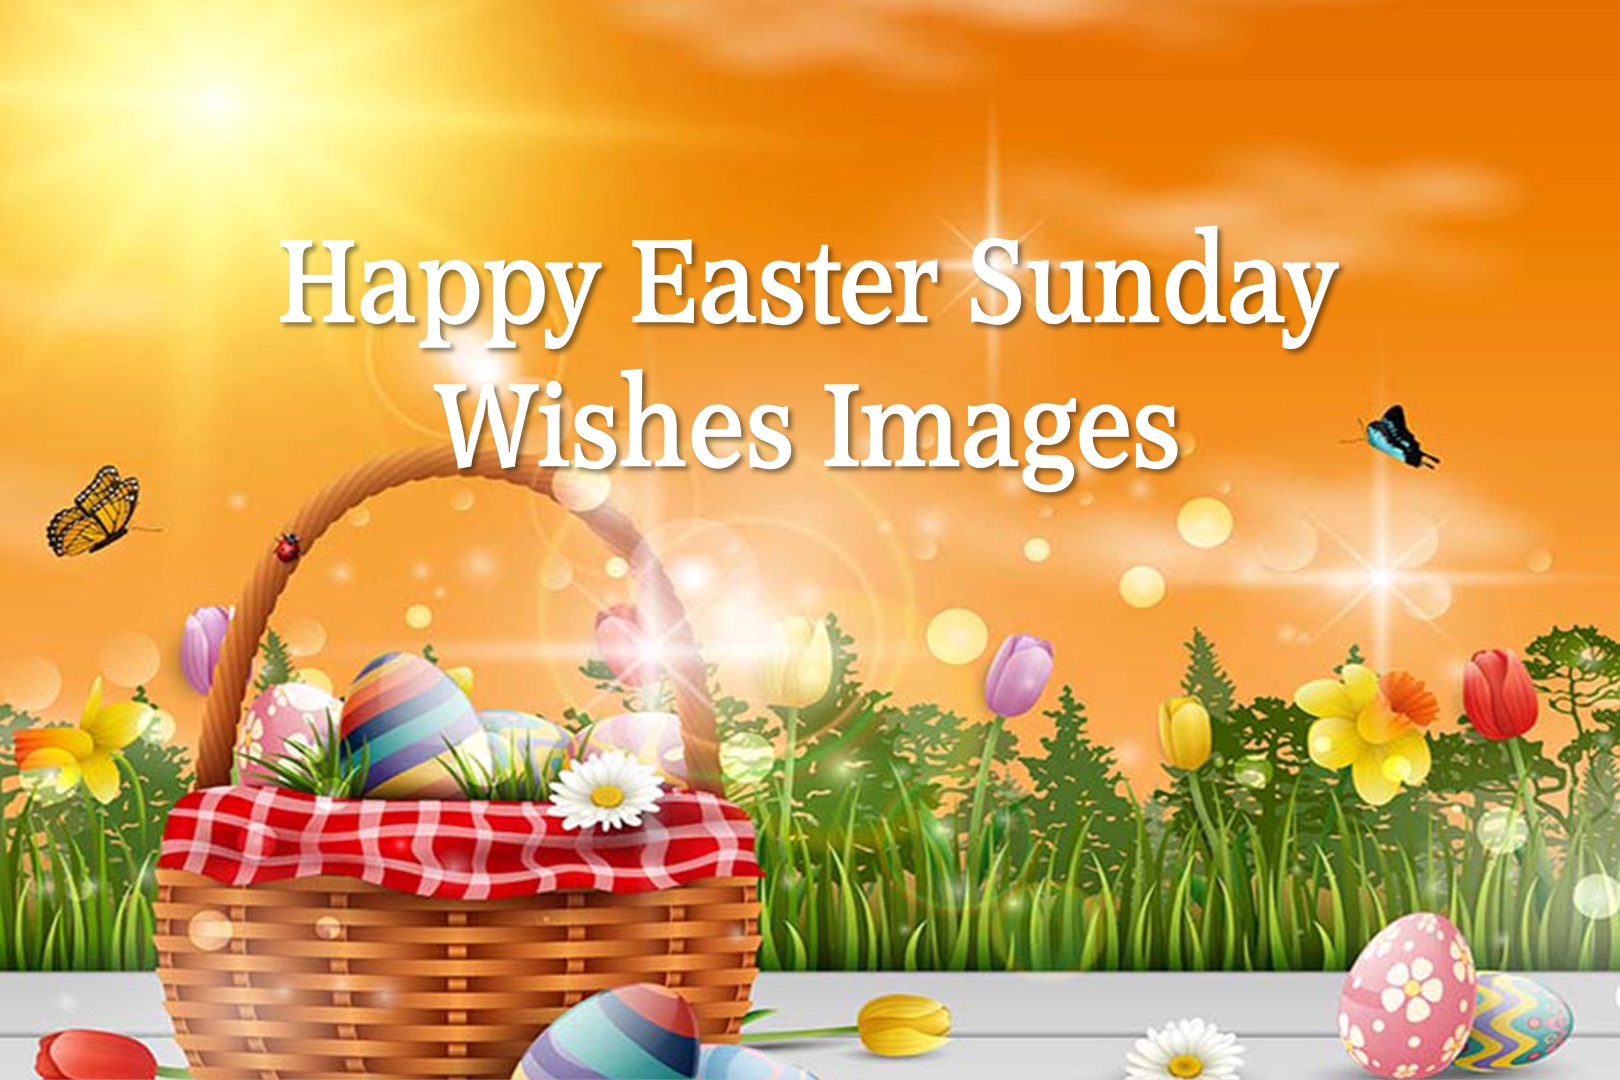 Happy Easter Sunday Wishes Images